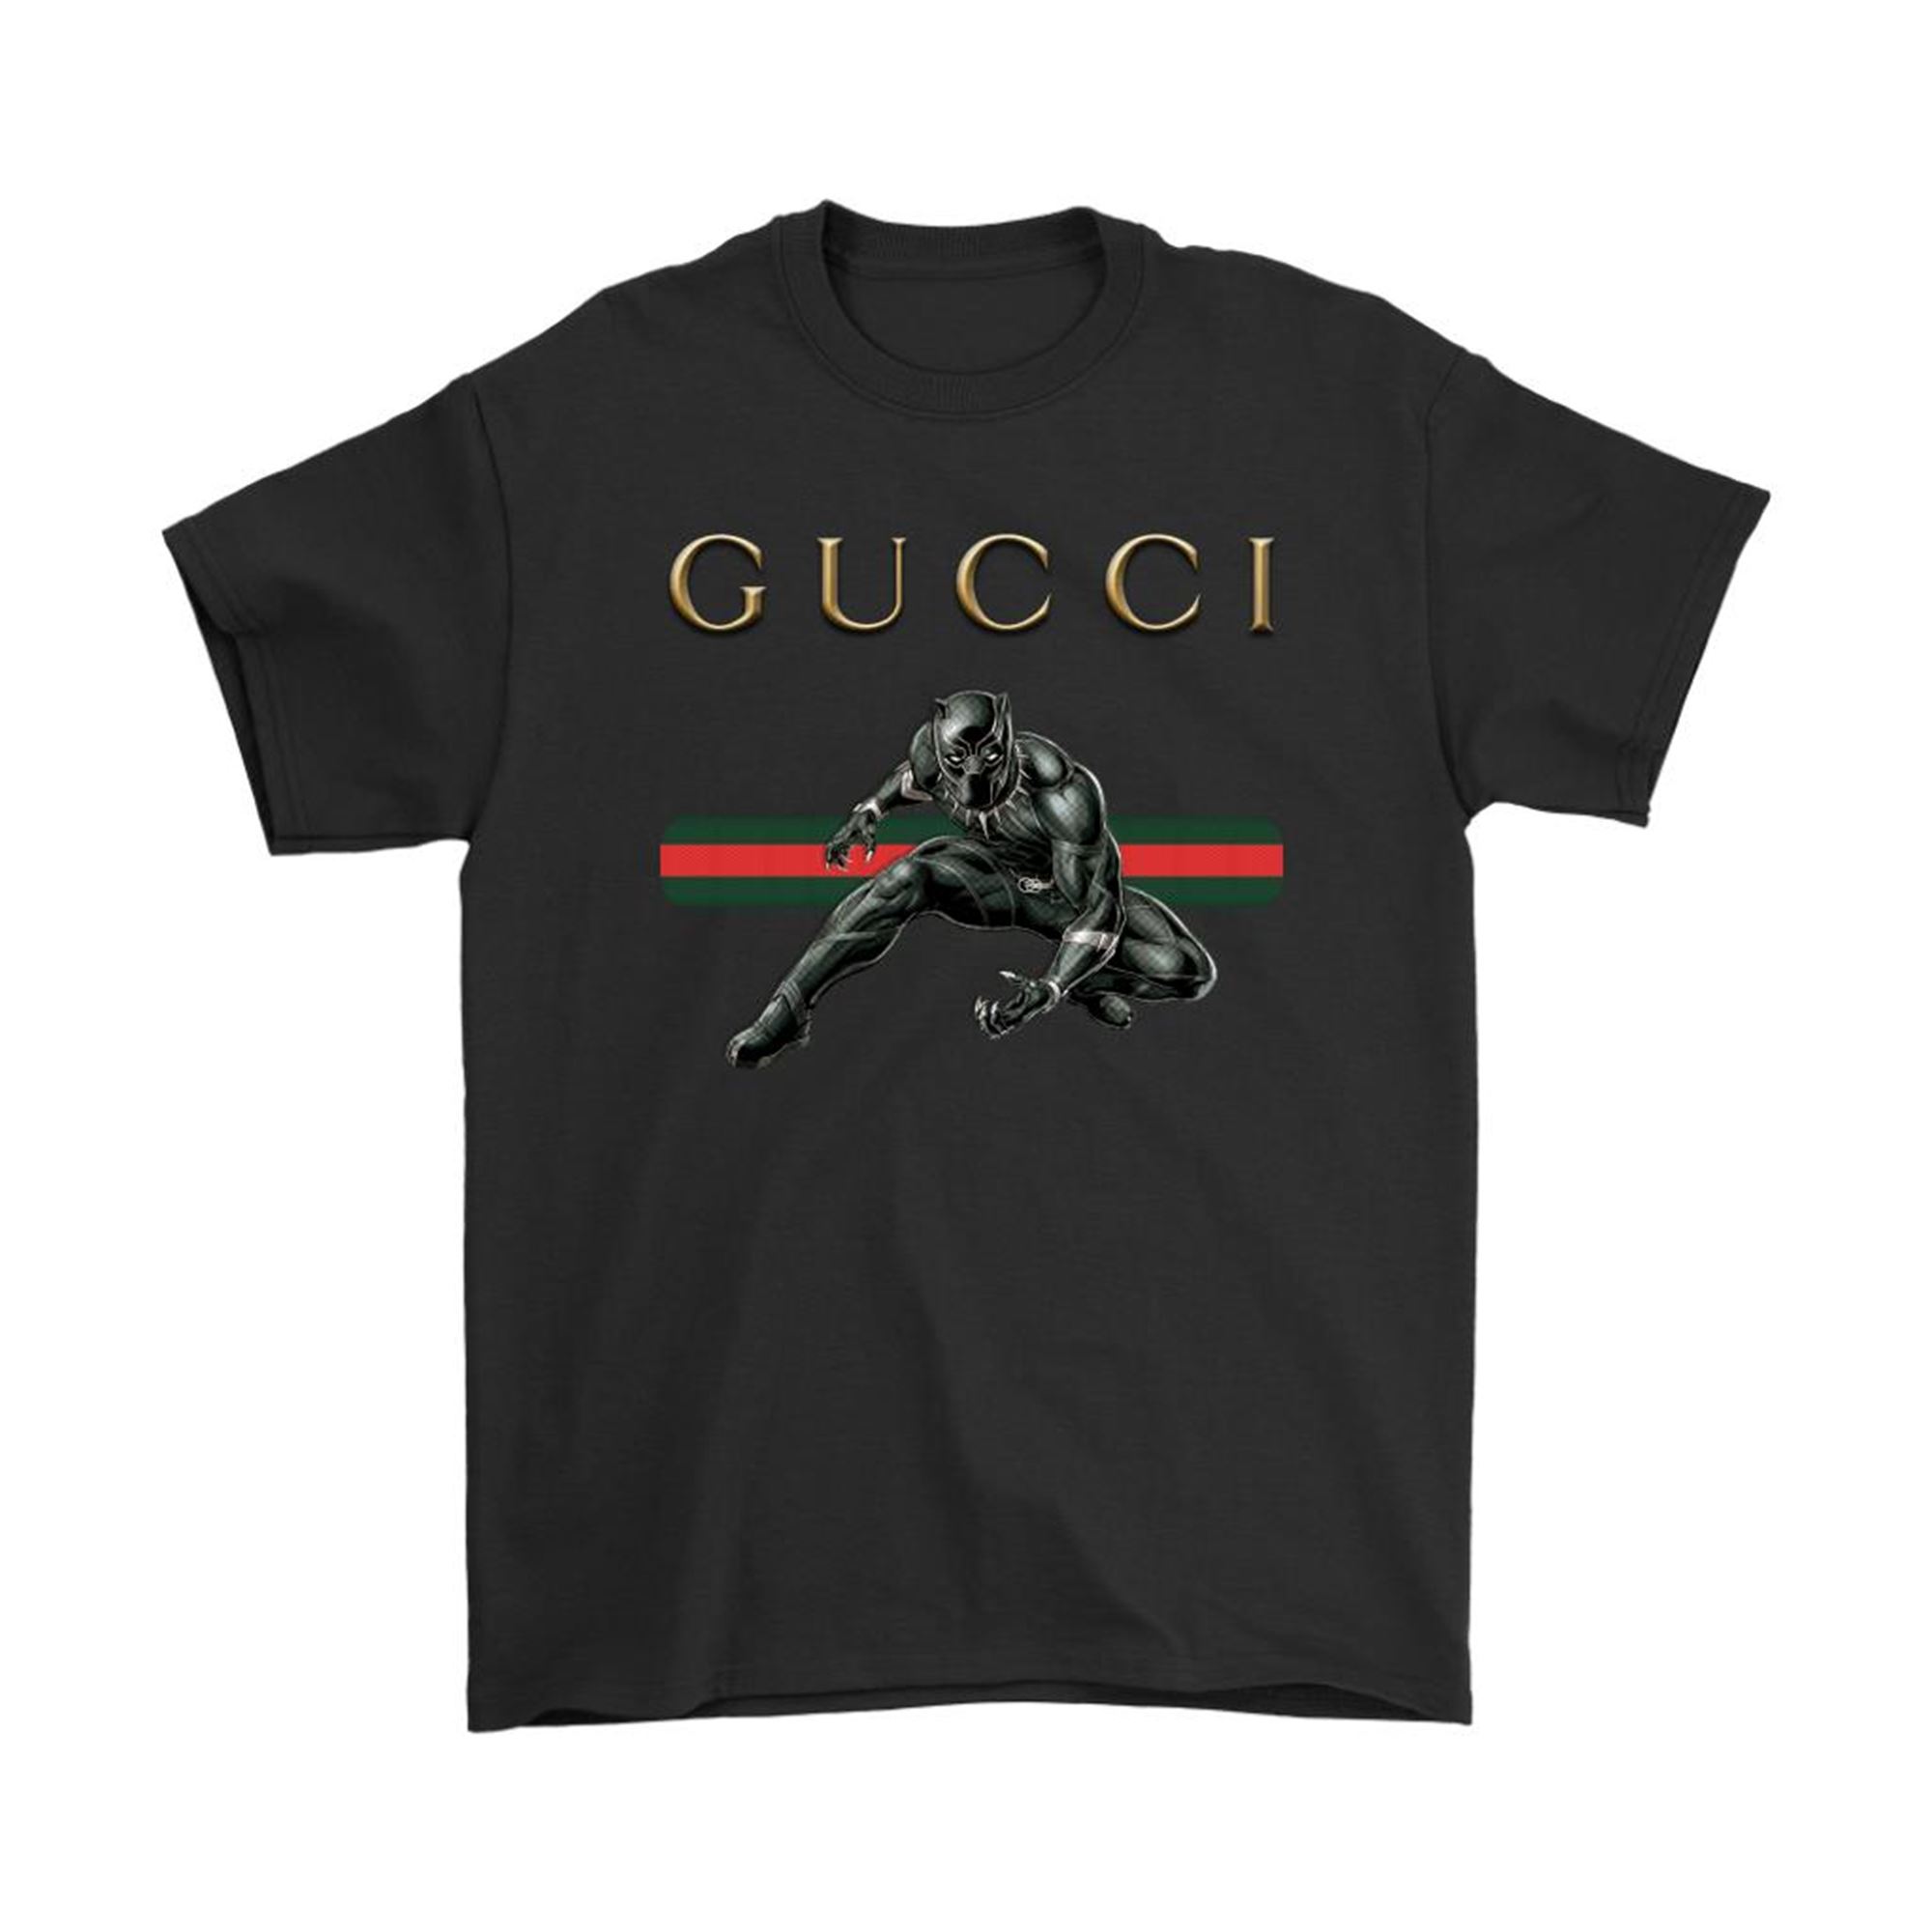 Say It With Black Panther Gucci Mashup Shirts